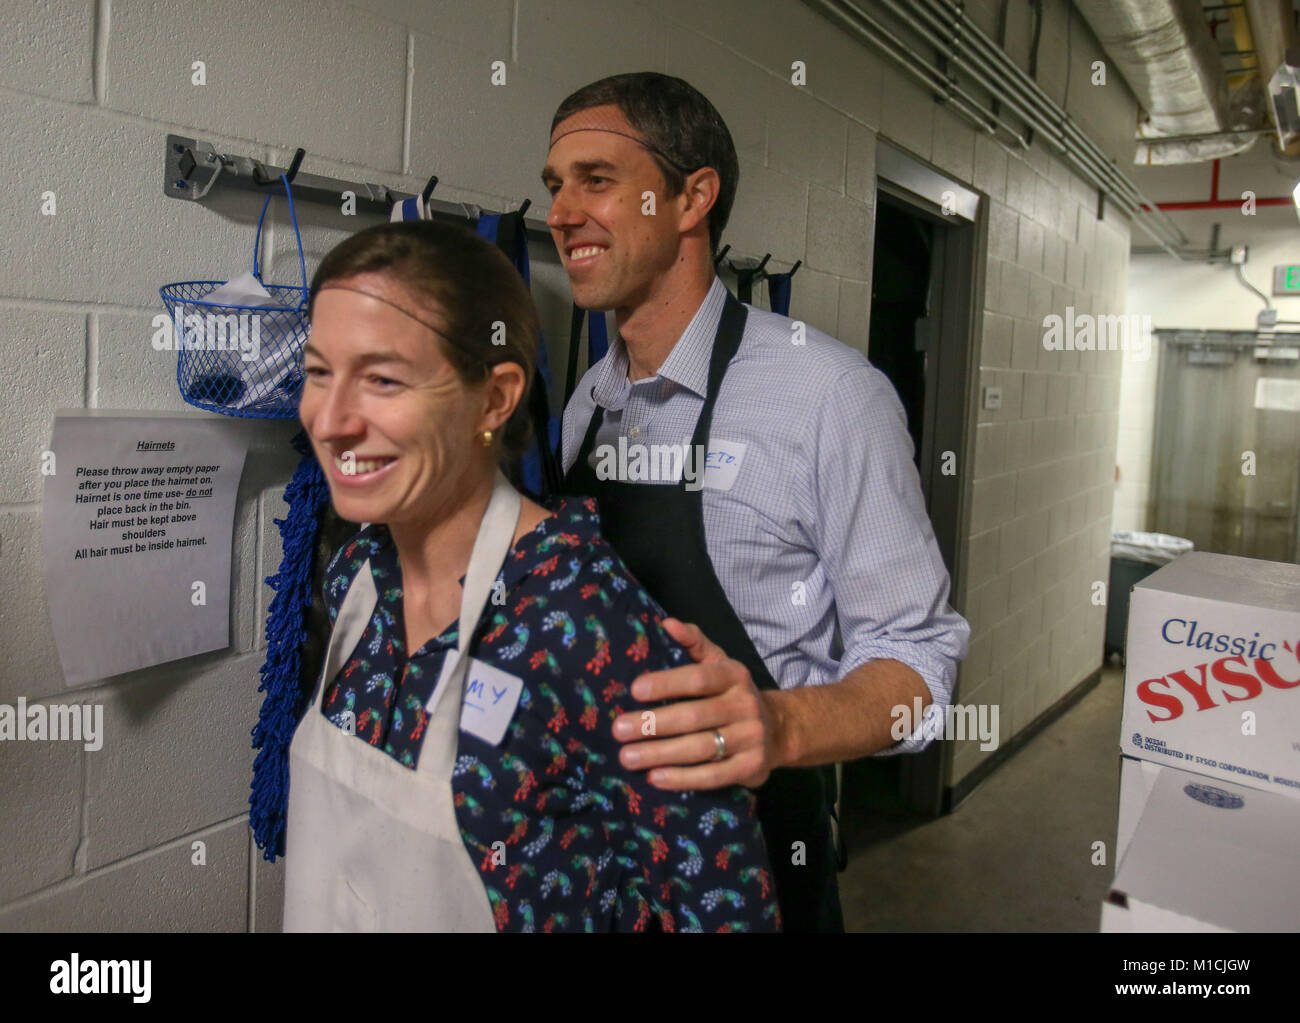 Houston, Texas, USA. 28th January, 2018. Beto O'Rourke, D-Texas and his wife Amy prepare to serve at The Beacon homeless shelter in Houston, TX. John Glaser/CSM/Alamy Live News Stock Photo